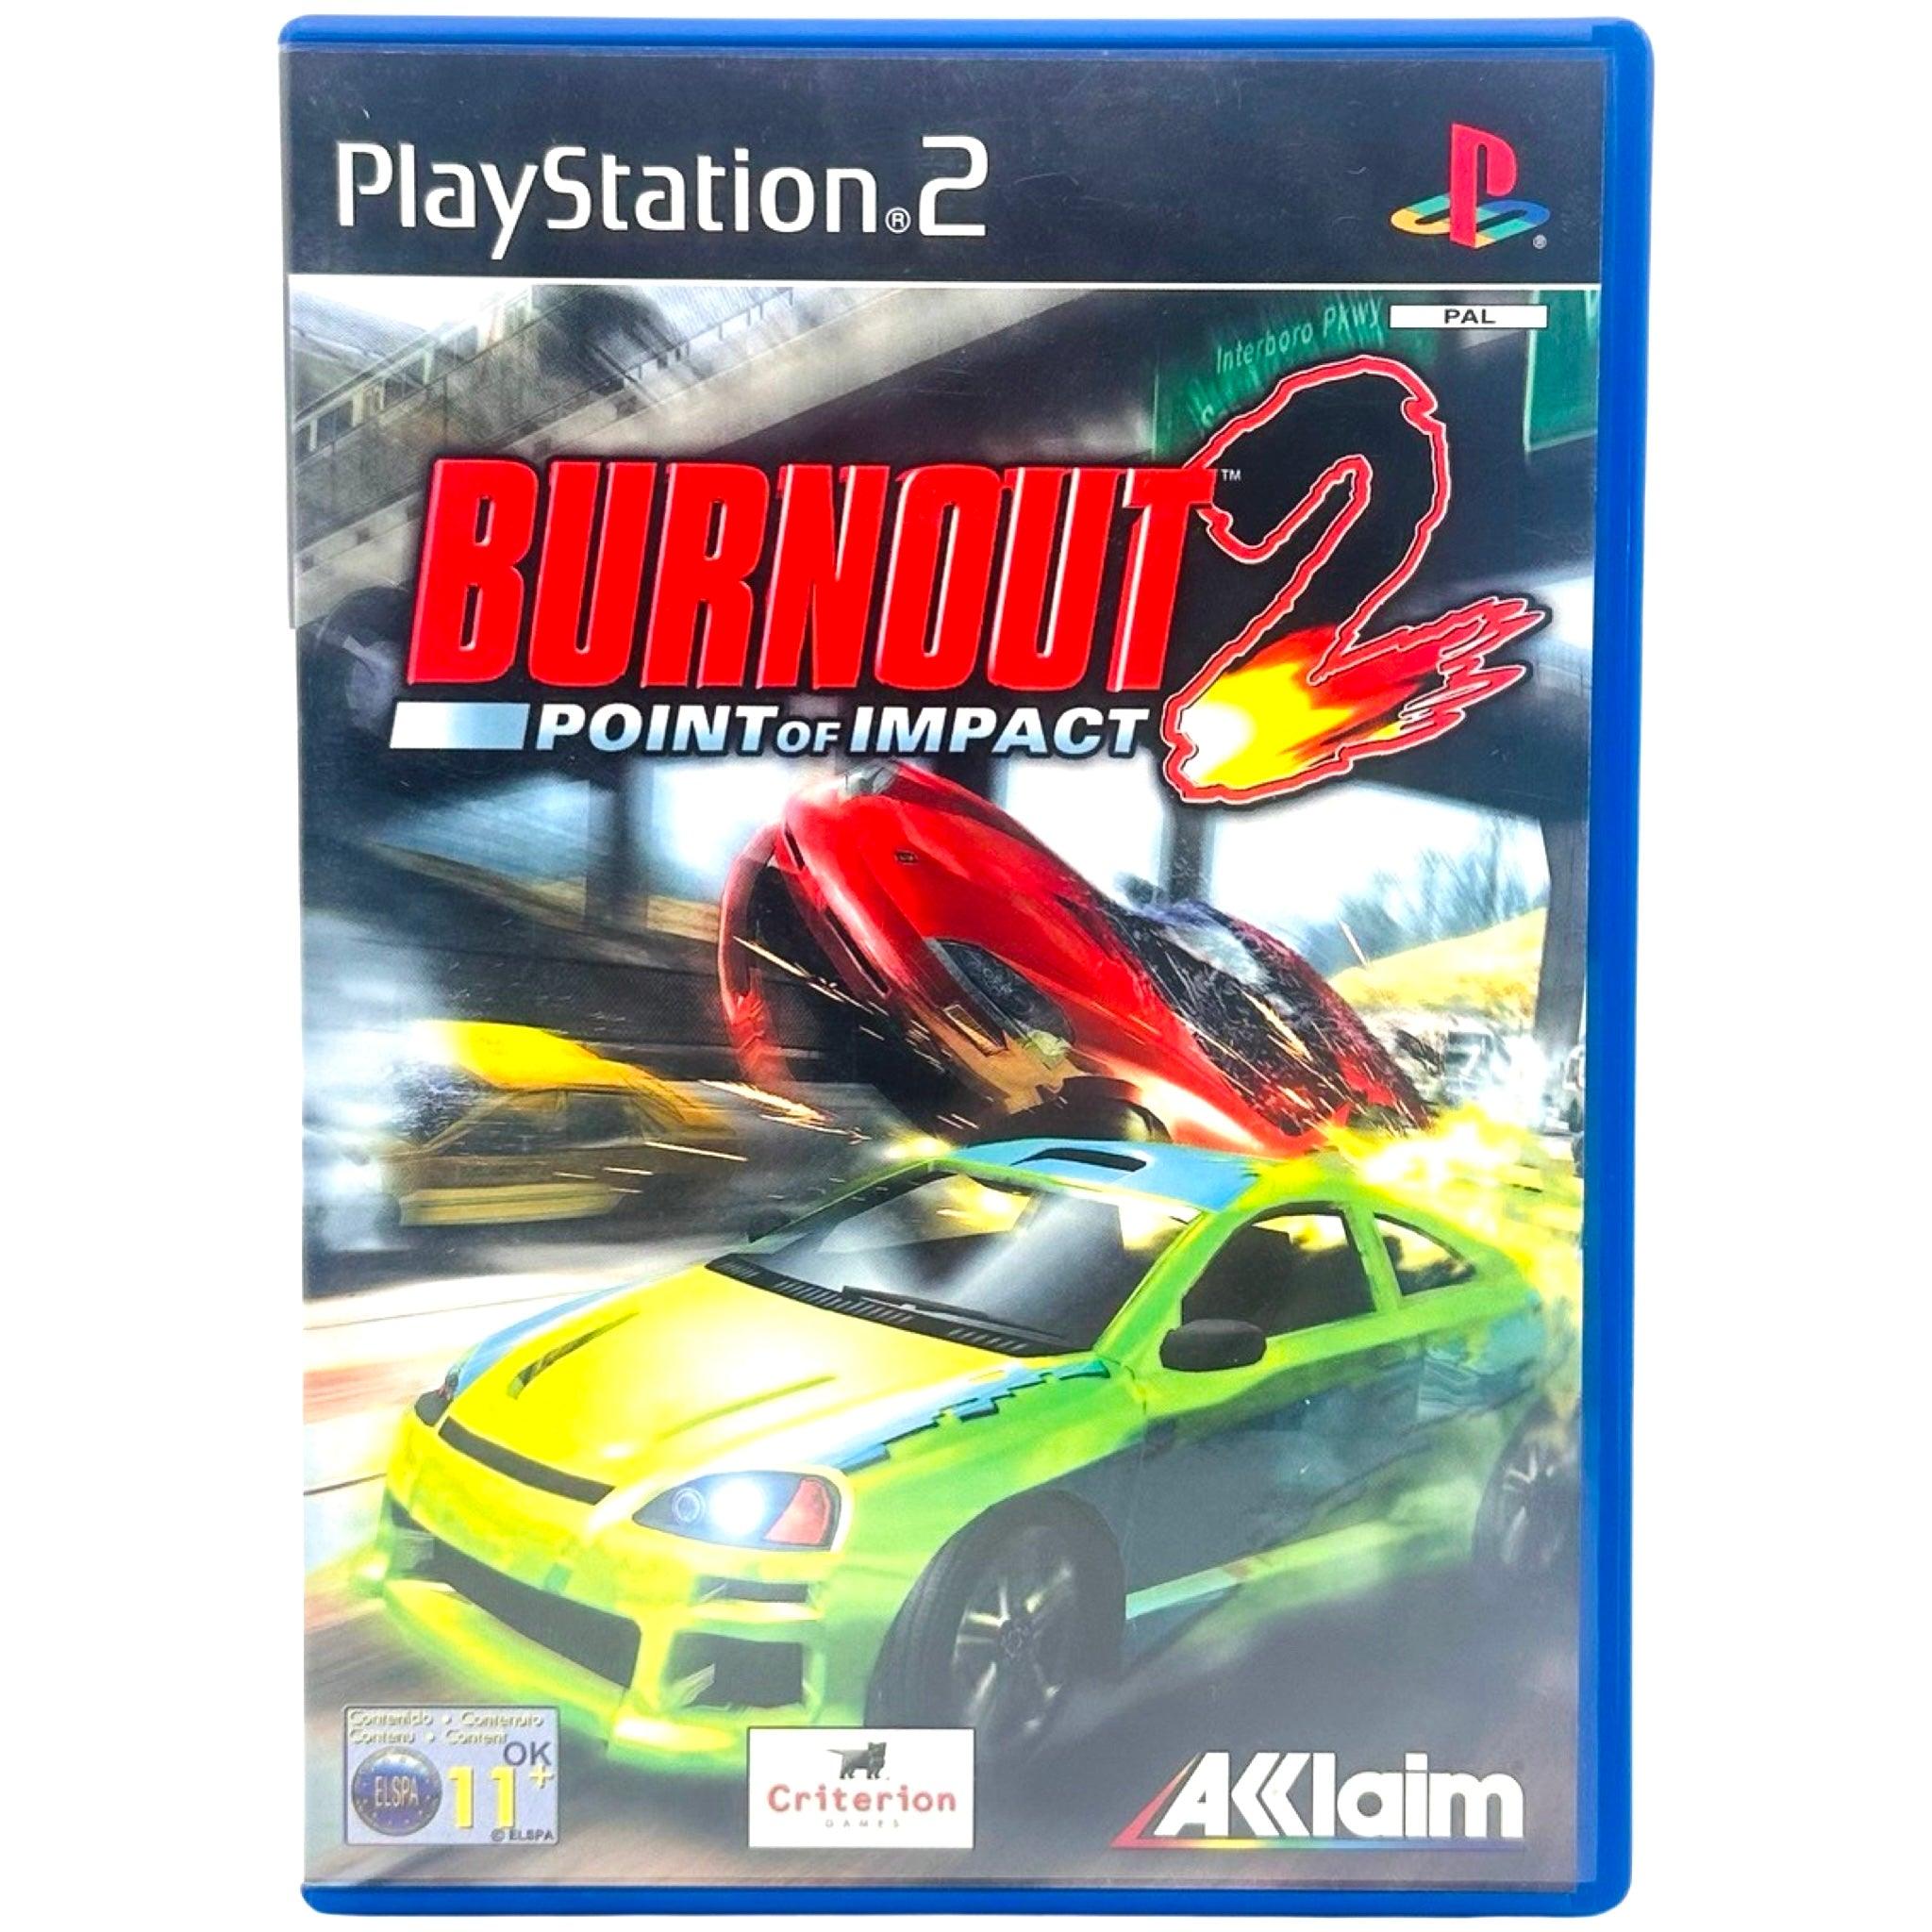 PS2: Burnout 2 Point Of Impact - RetroGaming.no